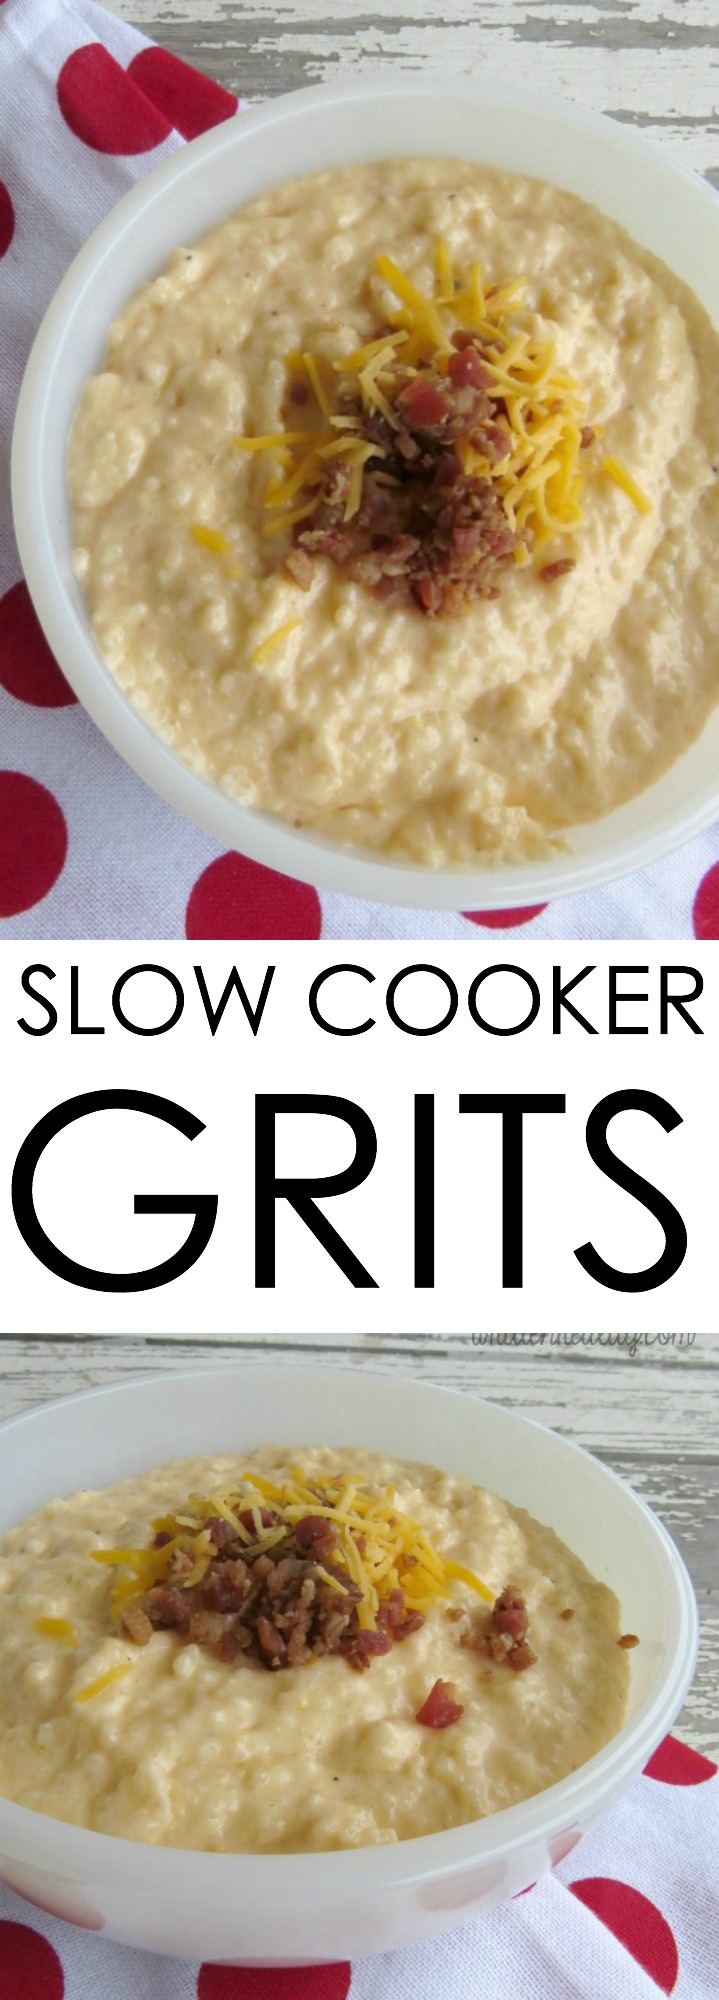 slow cooker grits